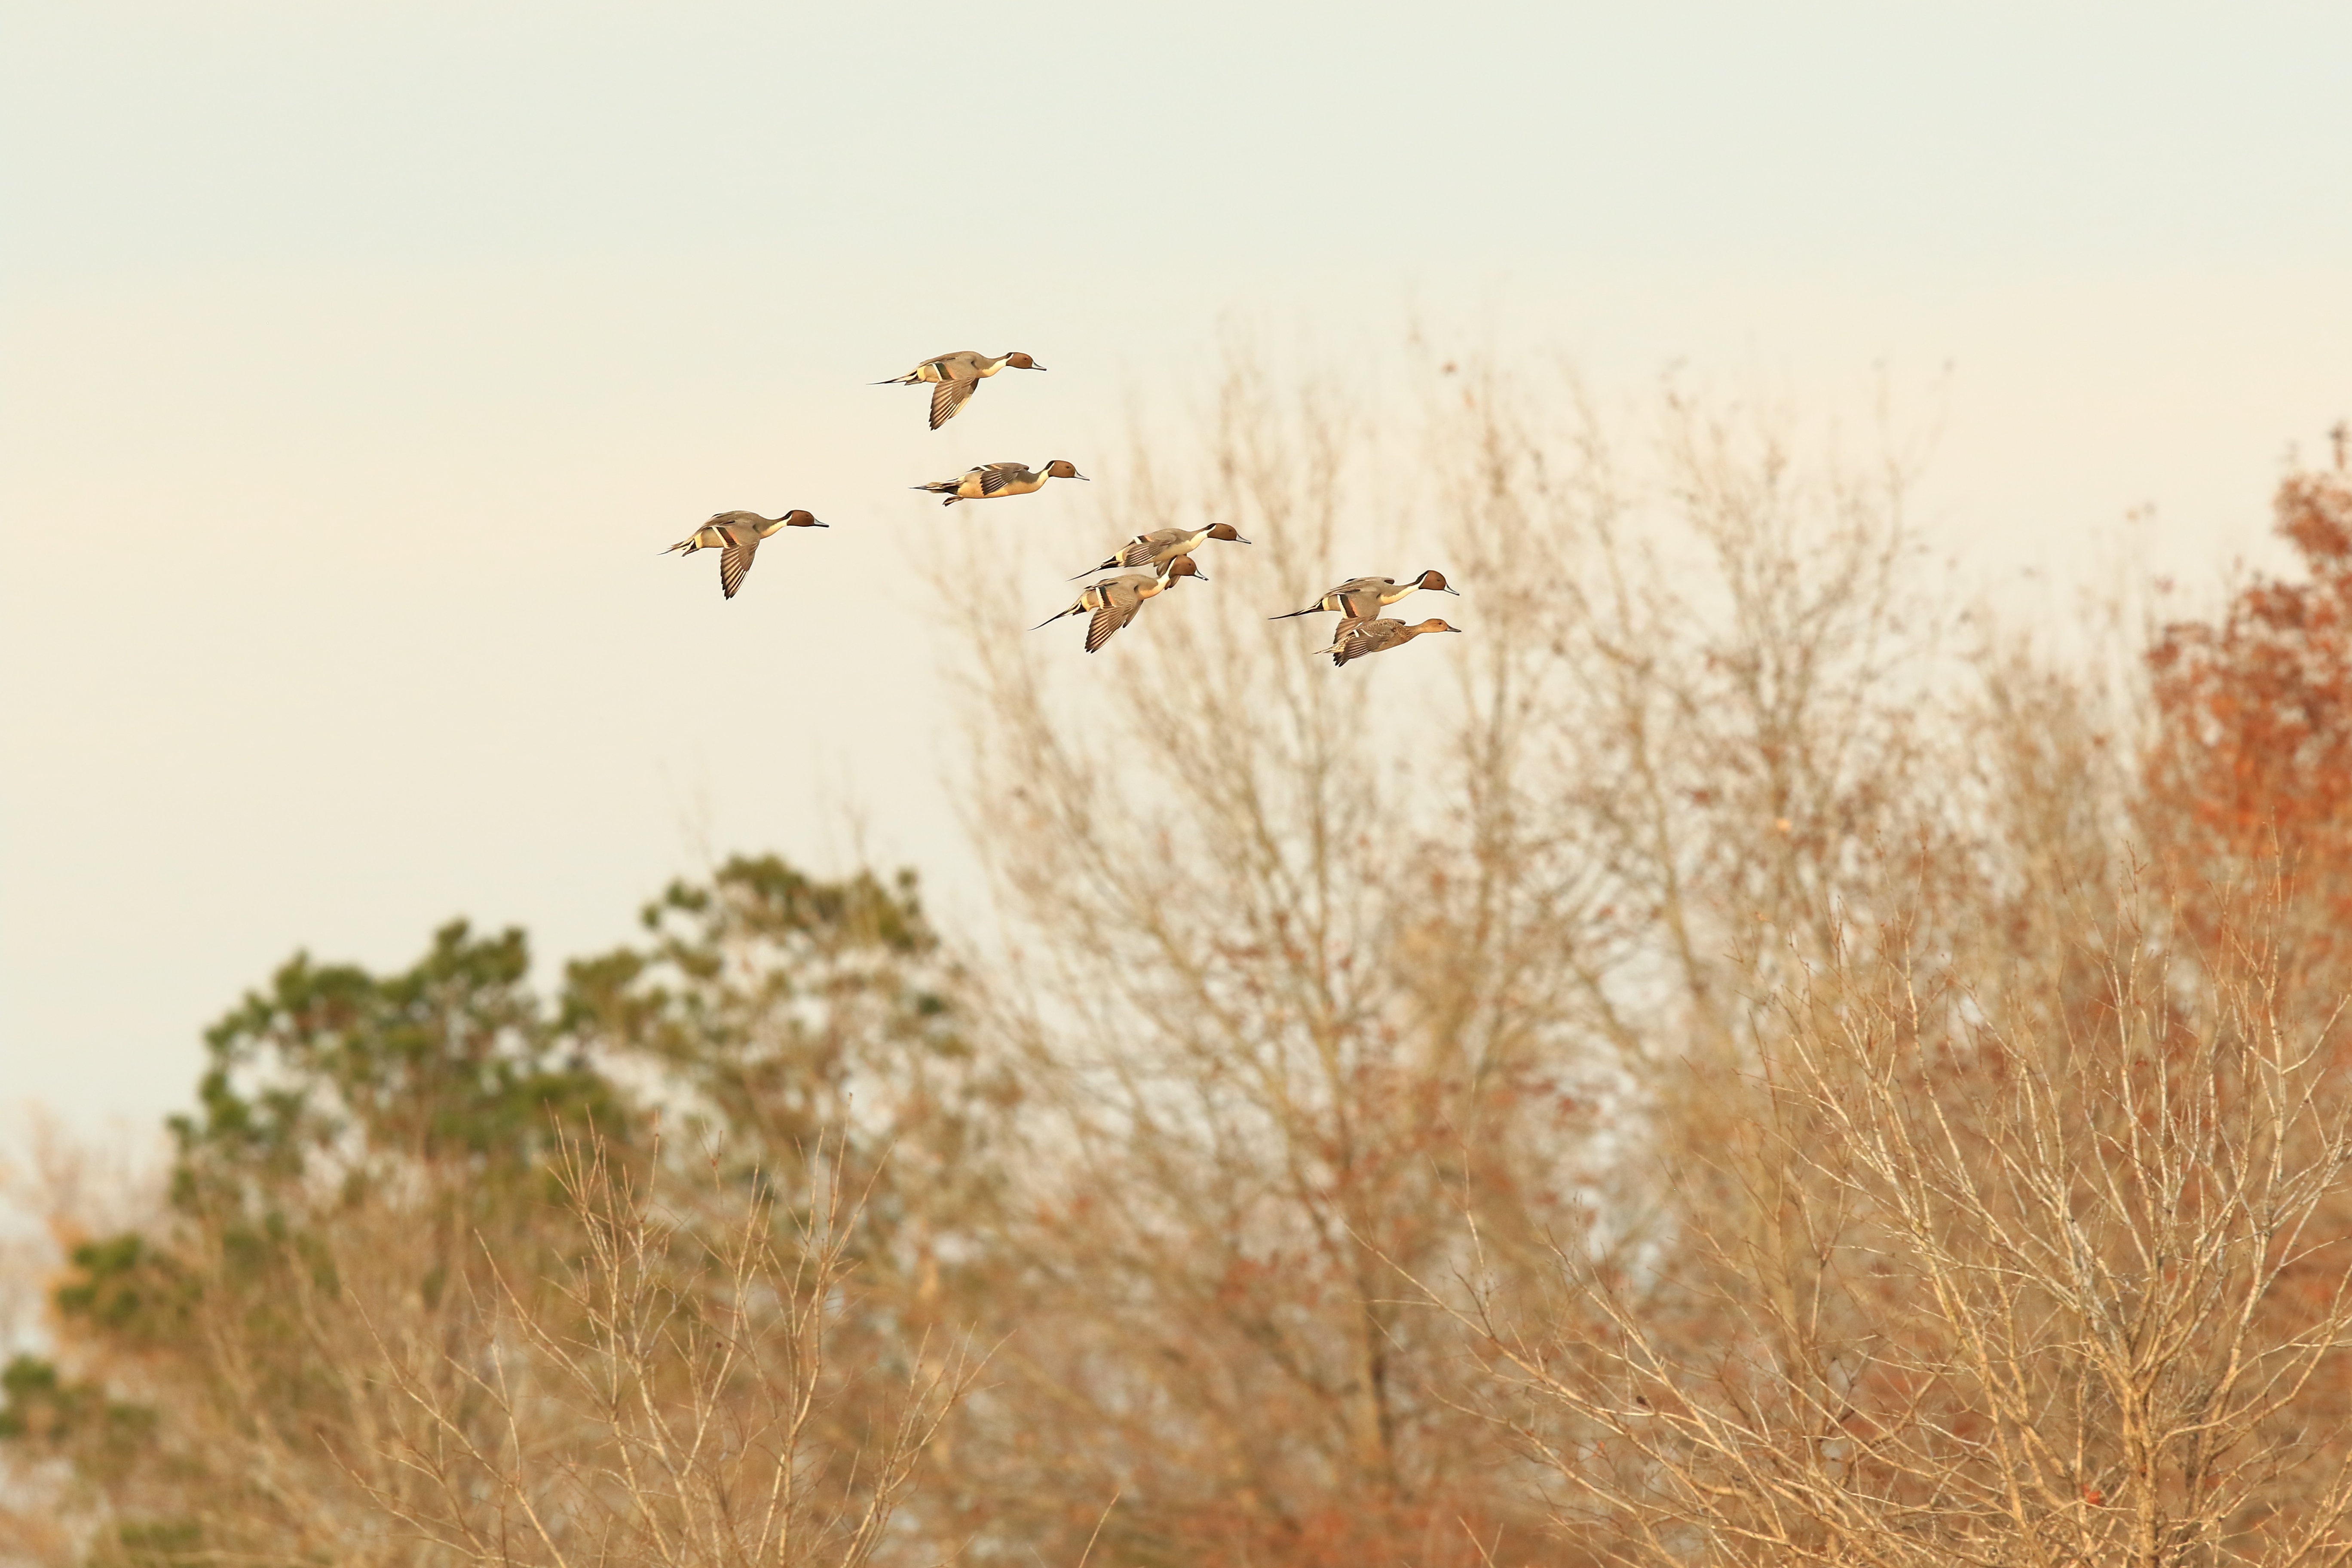 Northern pintail ducks flying in front of trees